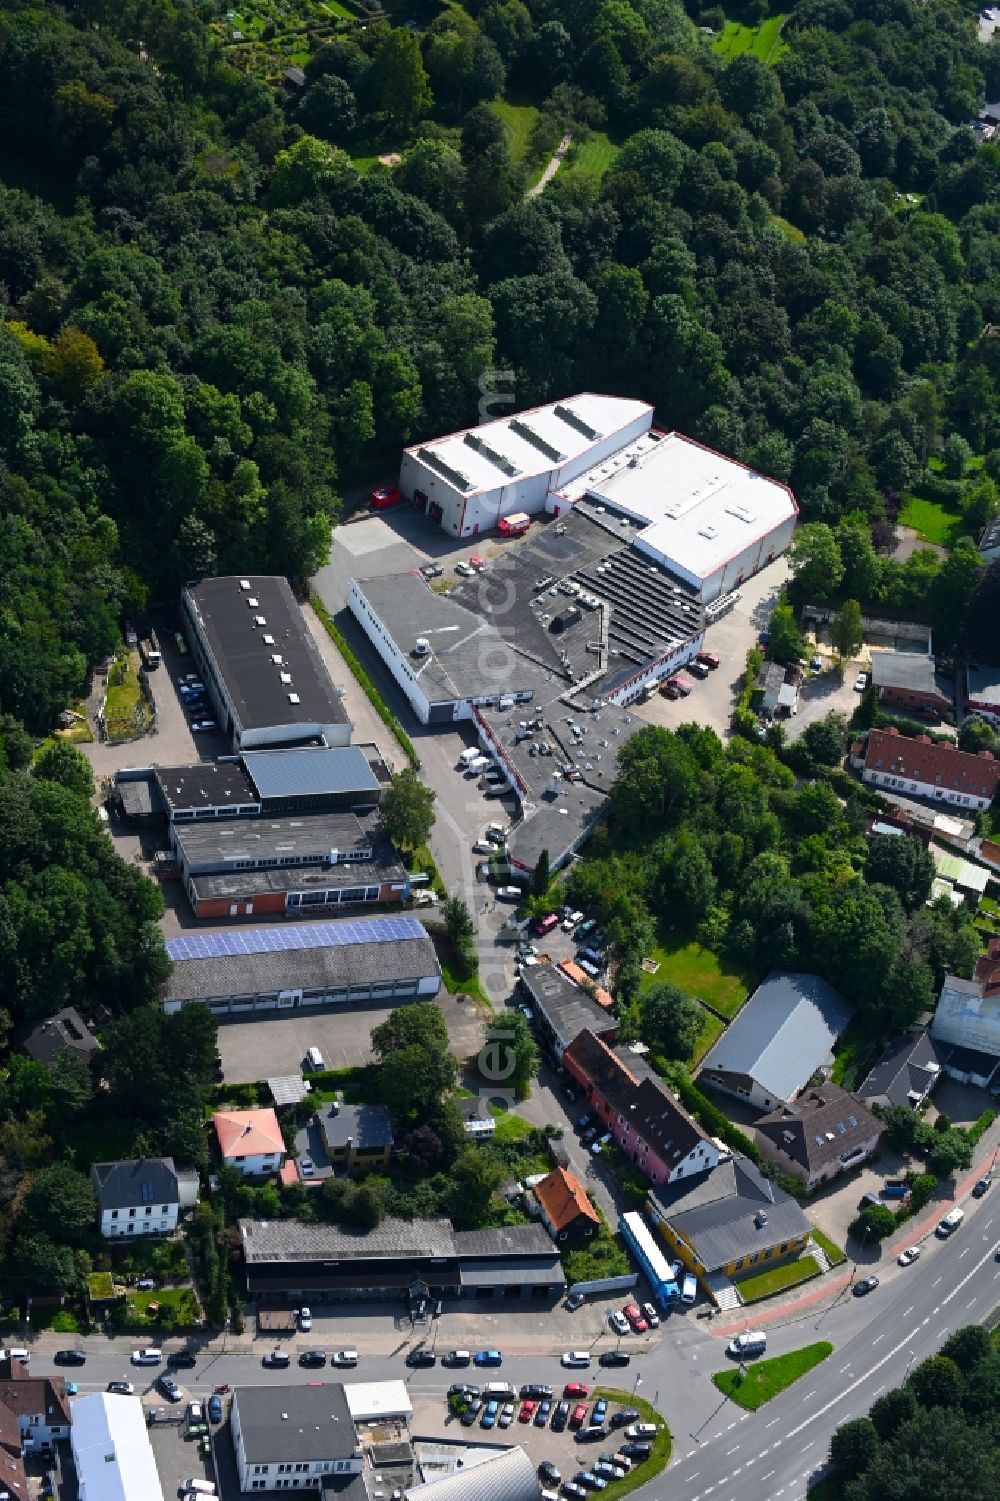 Flensburg from the bird's eye view: Building and production halls on the premises of FDF Flensburger Dragee-Fabrik GmbH & Co. KG on Harnishof in Flensburg in the state Schleswig-Holstein, Germany